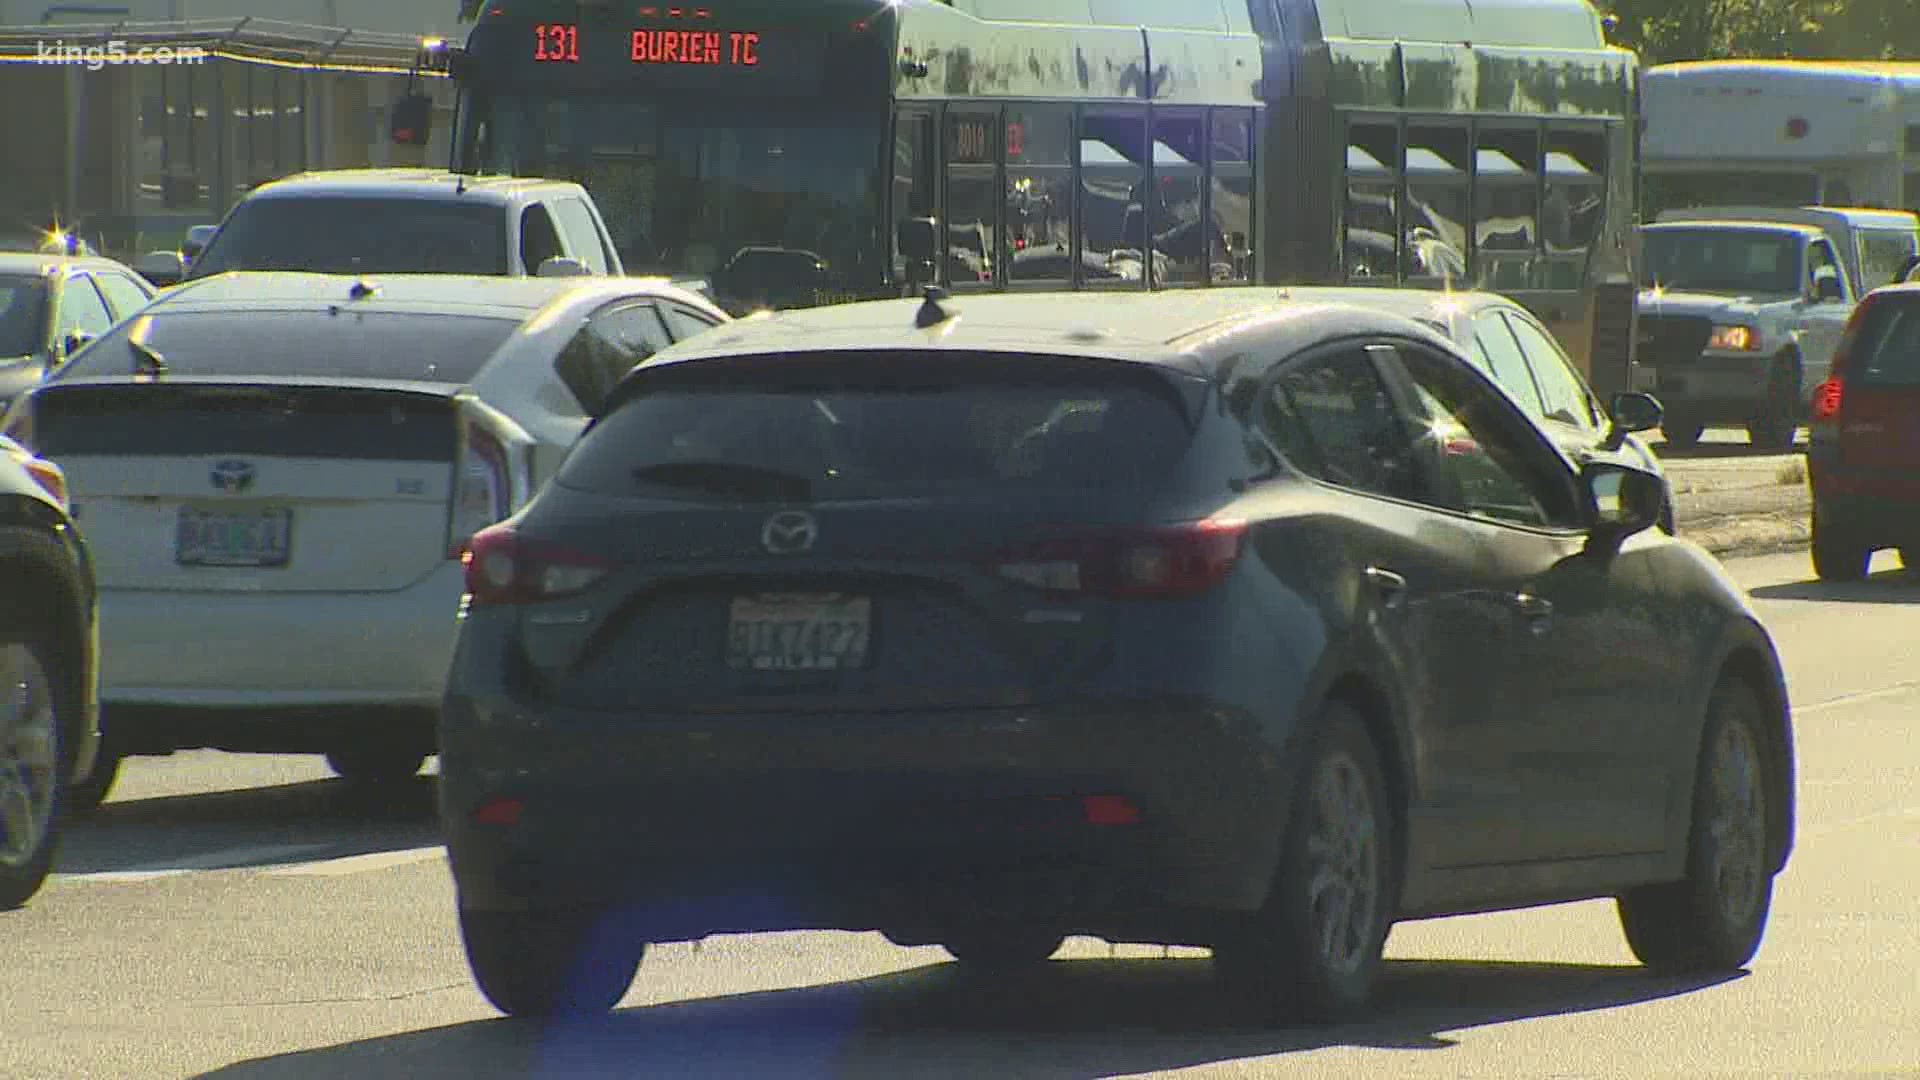 Traffic on the lower West Seattle Bridge has been limited to certain types of traffic like emergency vehicles and freight.  But unauthorized drivers will face fines.